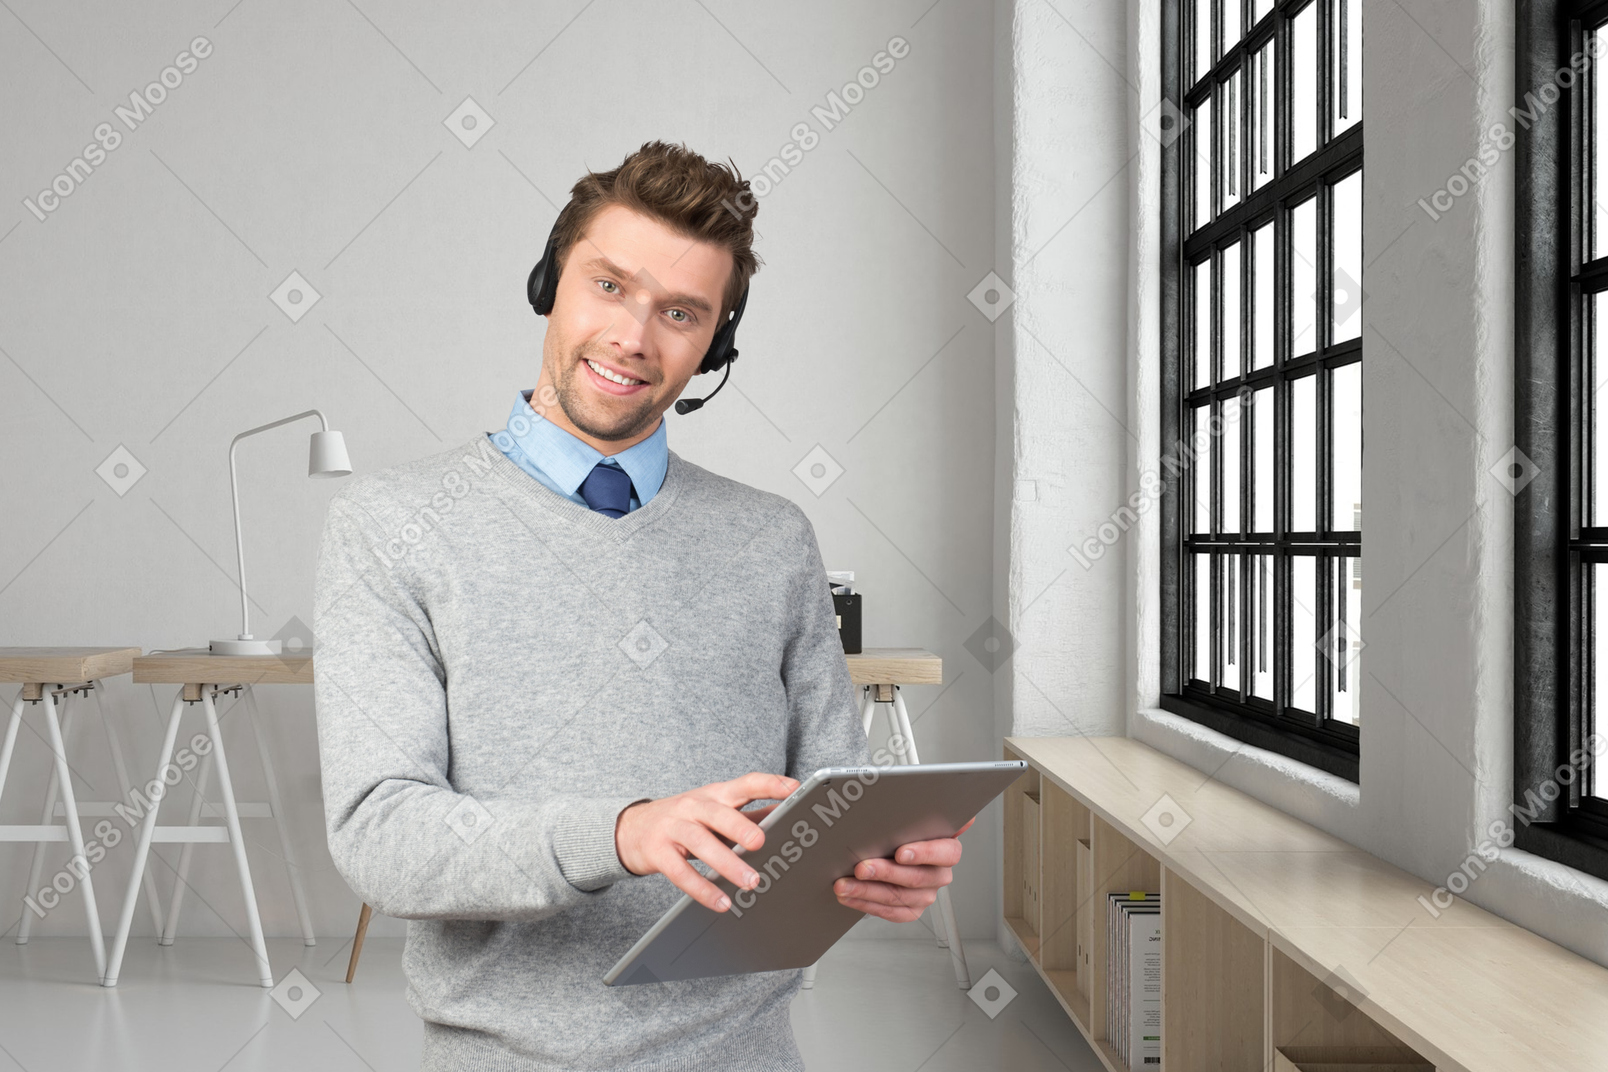 A man wearing a headset and holding a tablet in an office